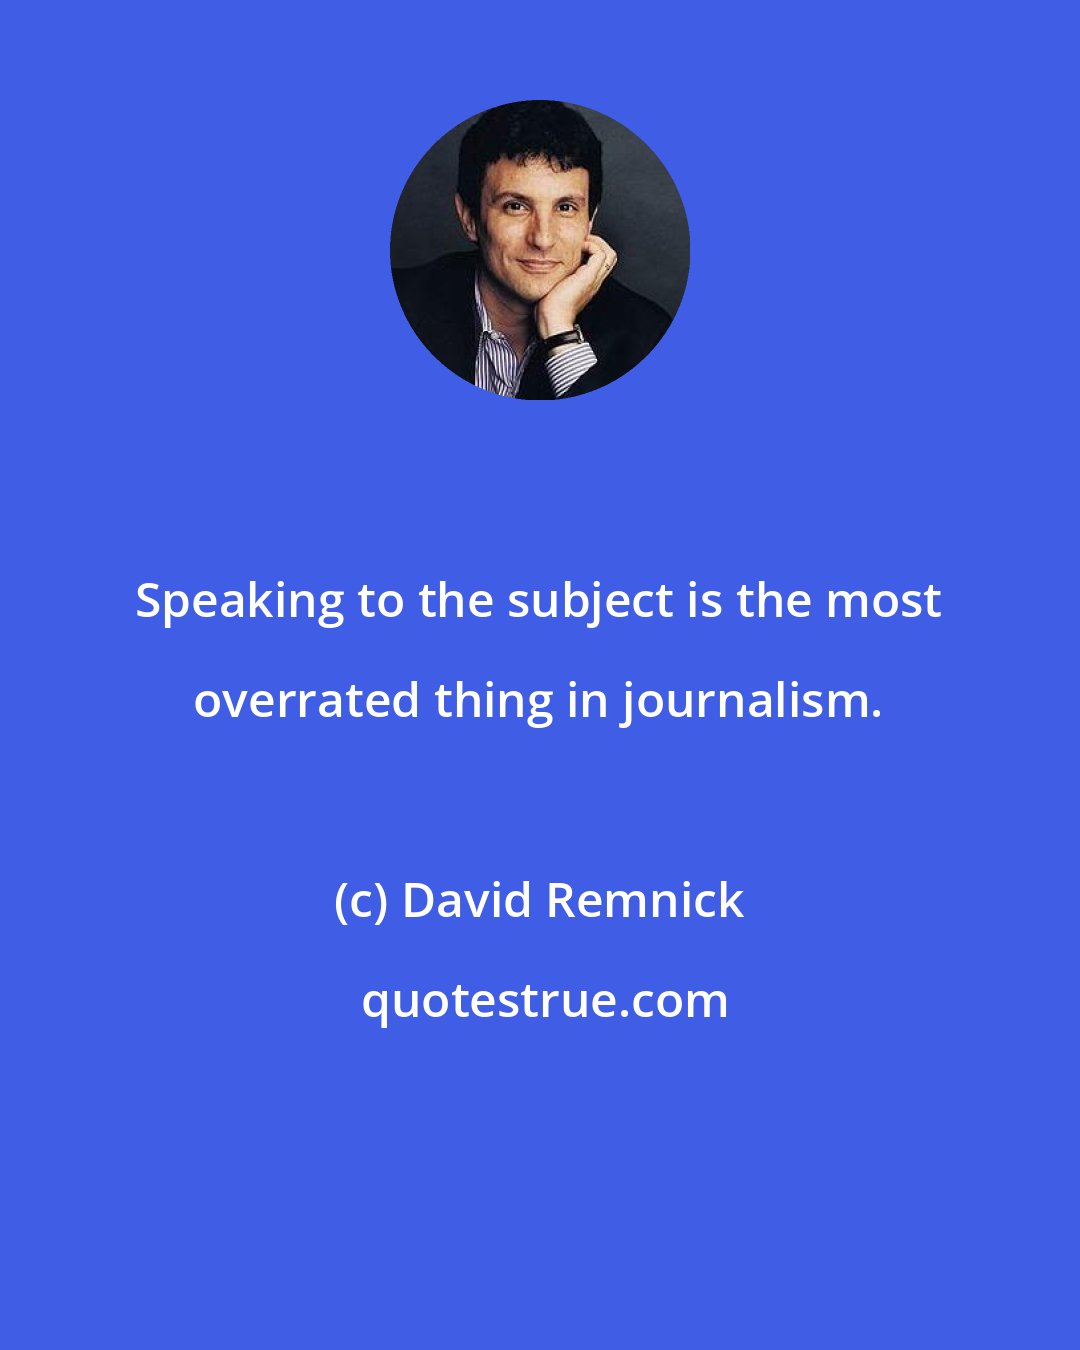 David Remnick: Speaking to the subject is the most overrated thing in journalism.